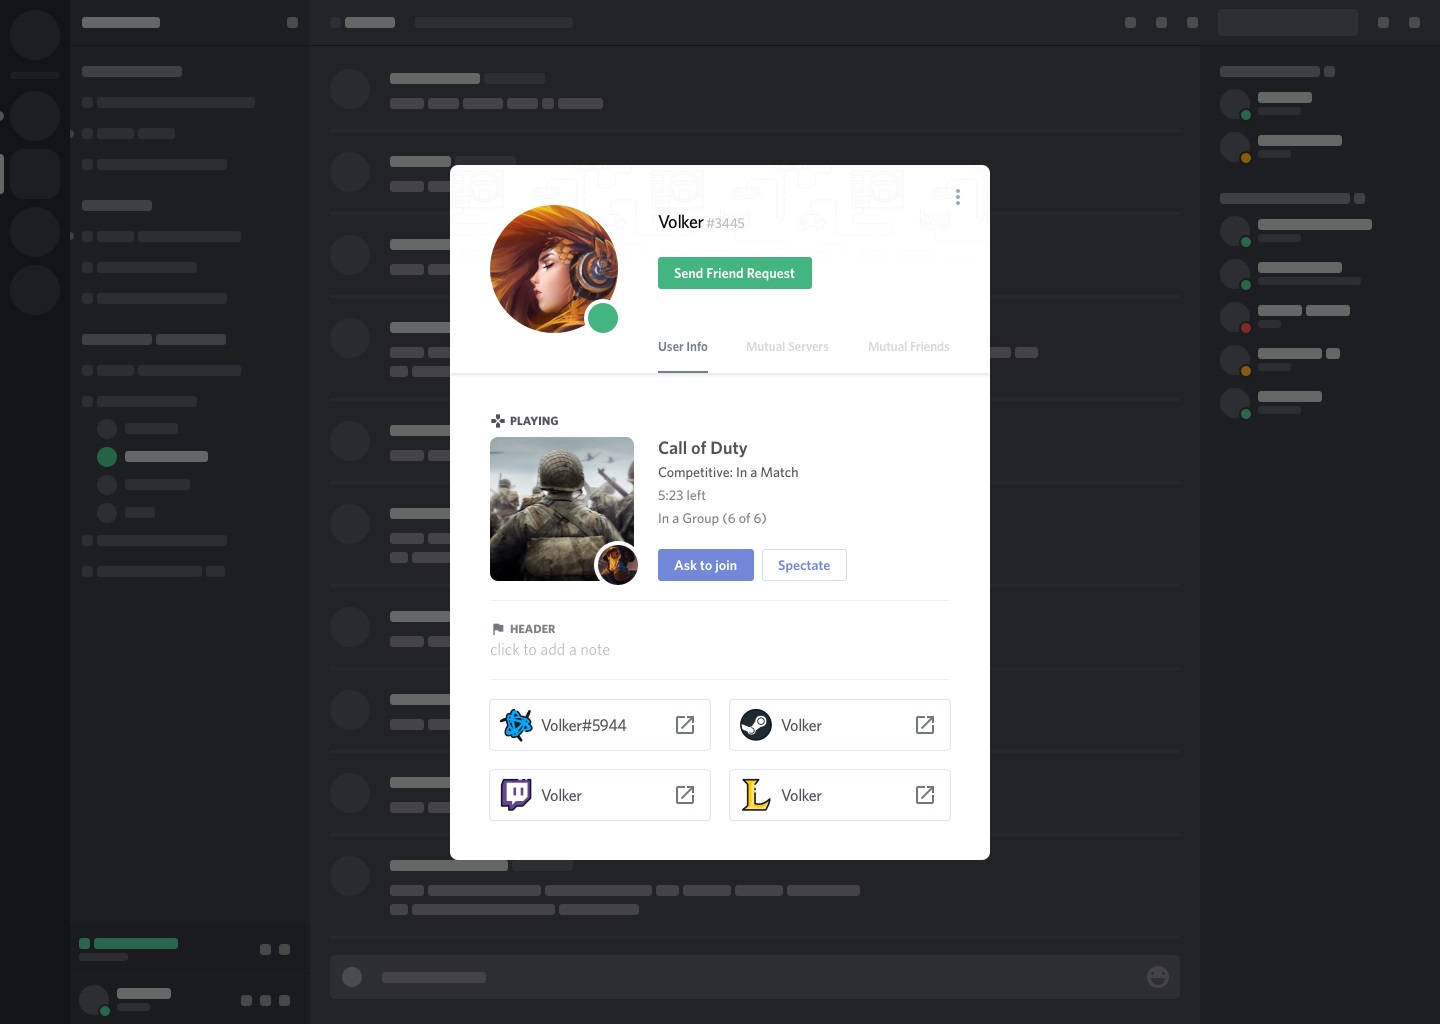 Configure your Discord Rich Presence Application - Trucky - The